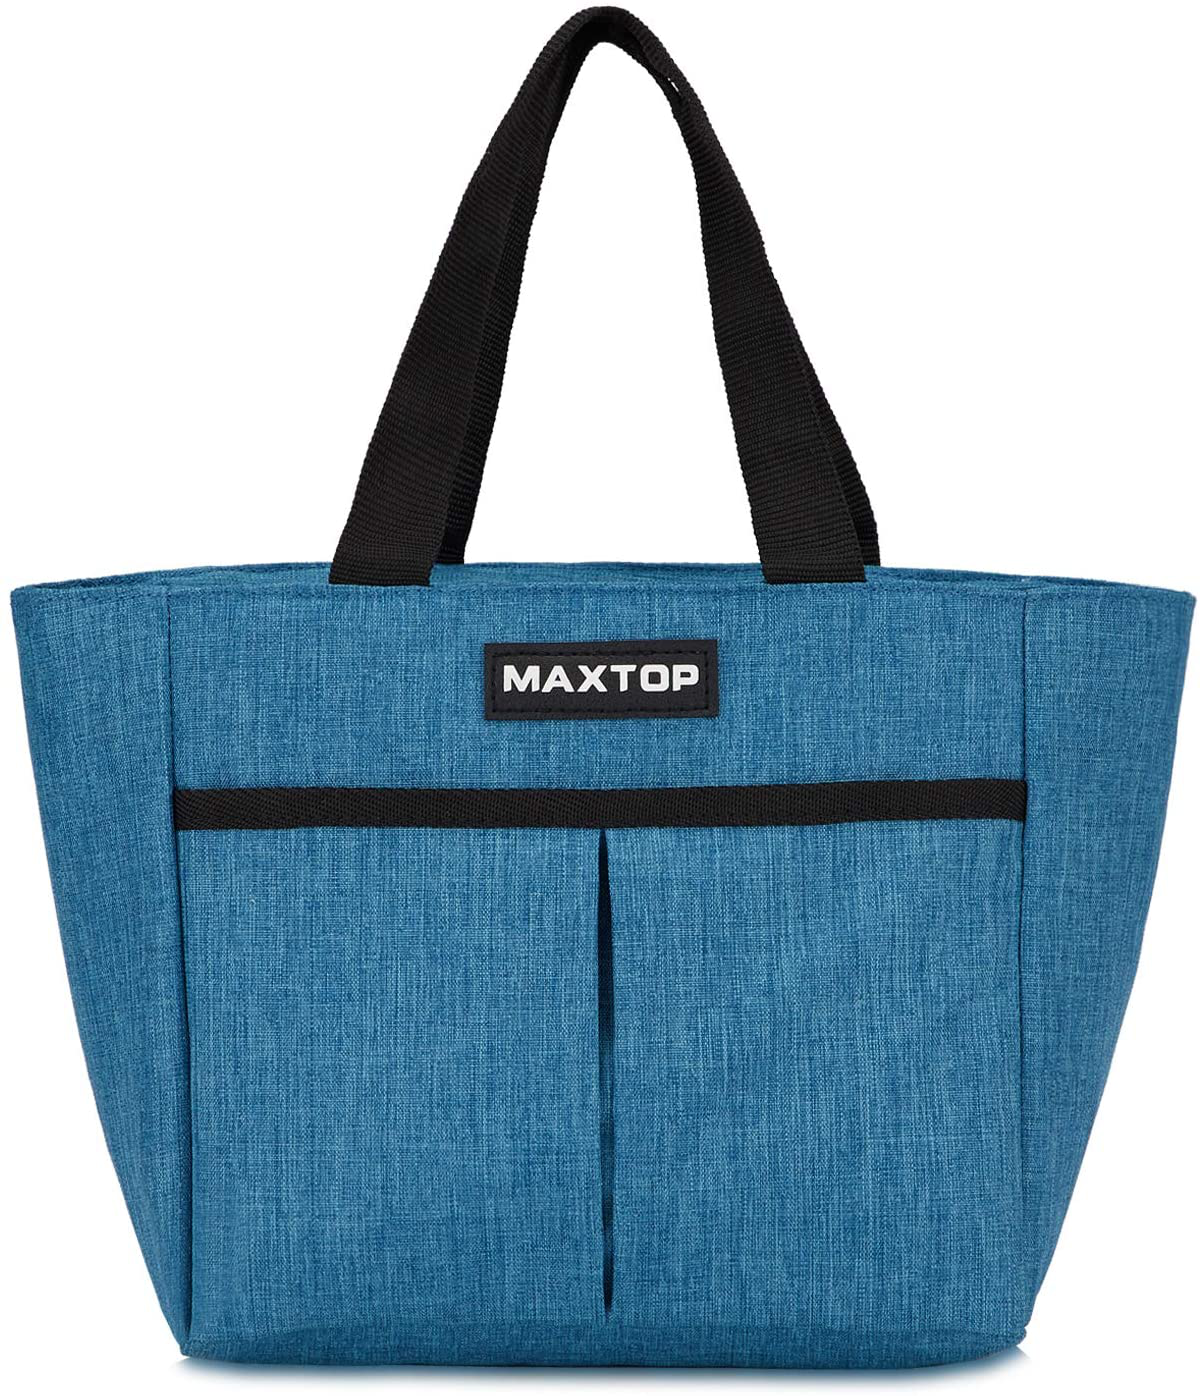 MAXTOP Lunch Bags for Women,Insulated Thermal Lunch Tote Bag,Lunch Box with Front Pocket for Office Work Picnic Shopping (Blue, Large)